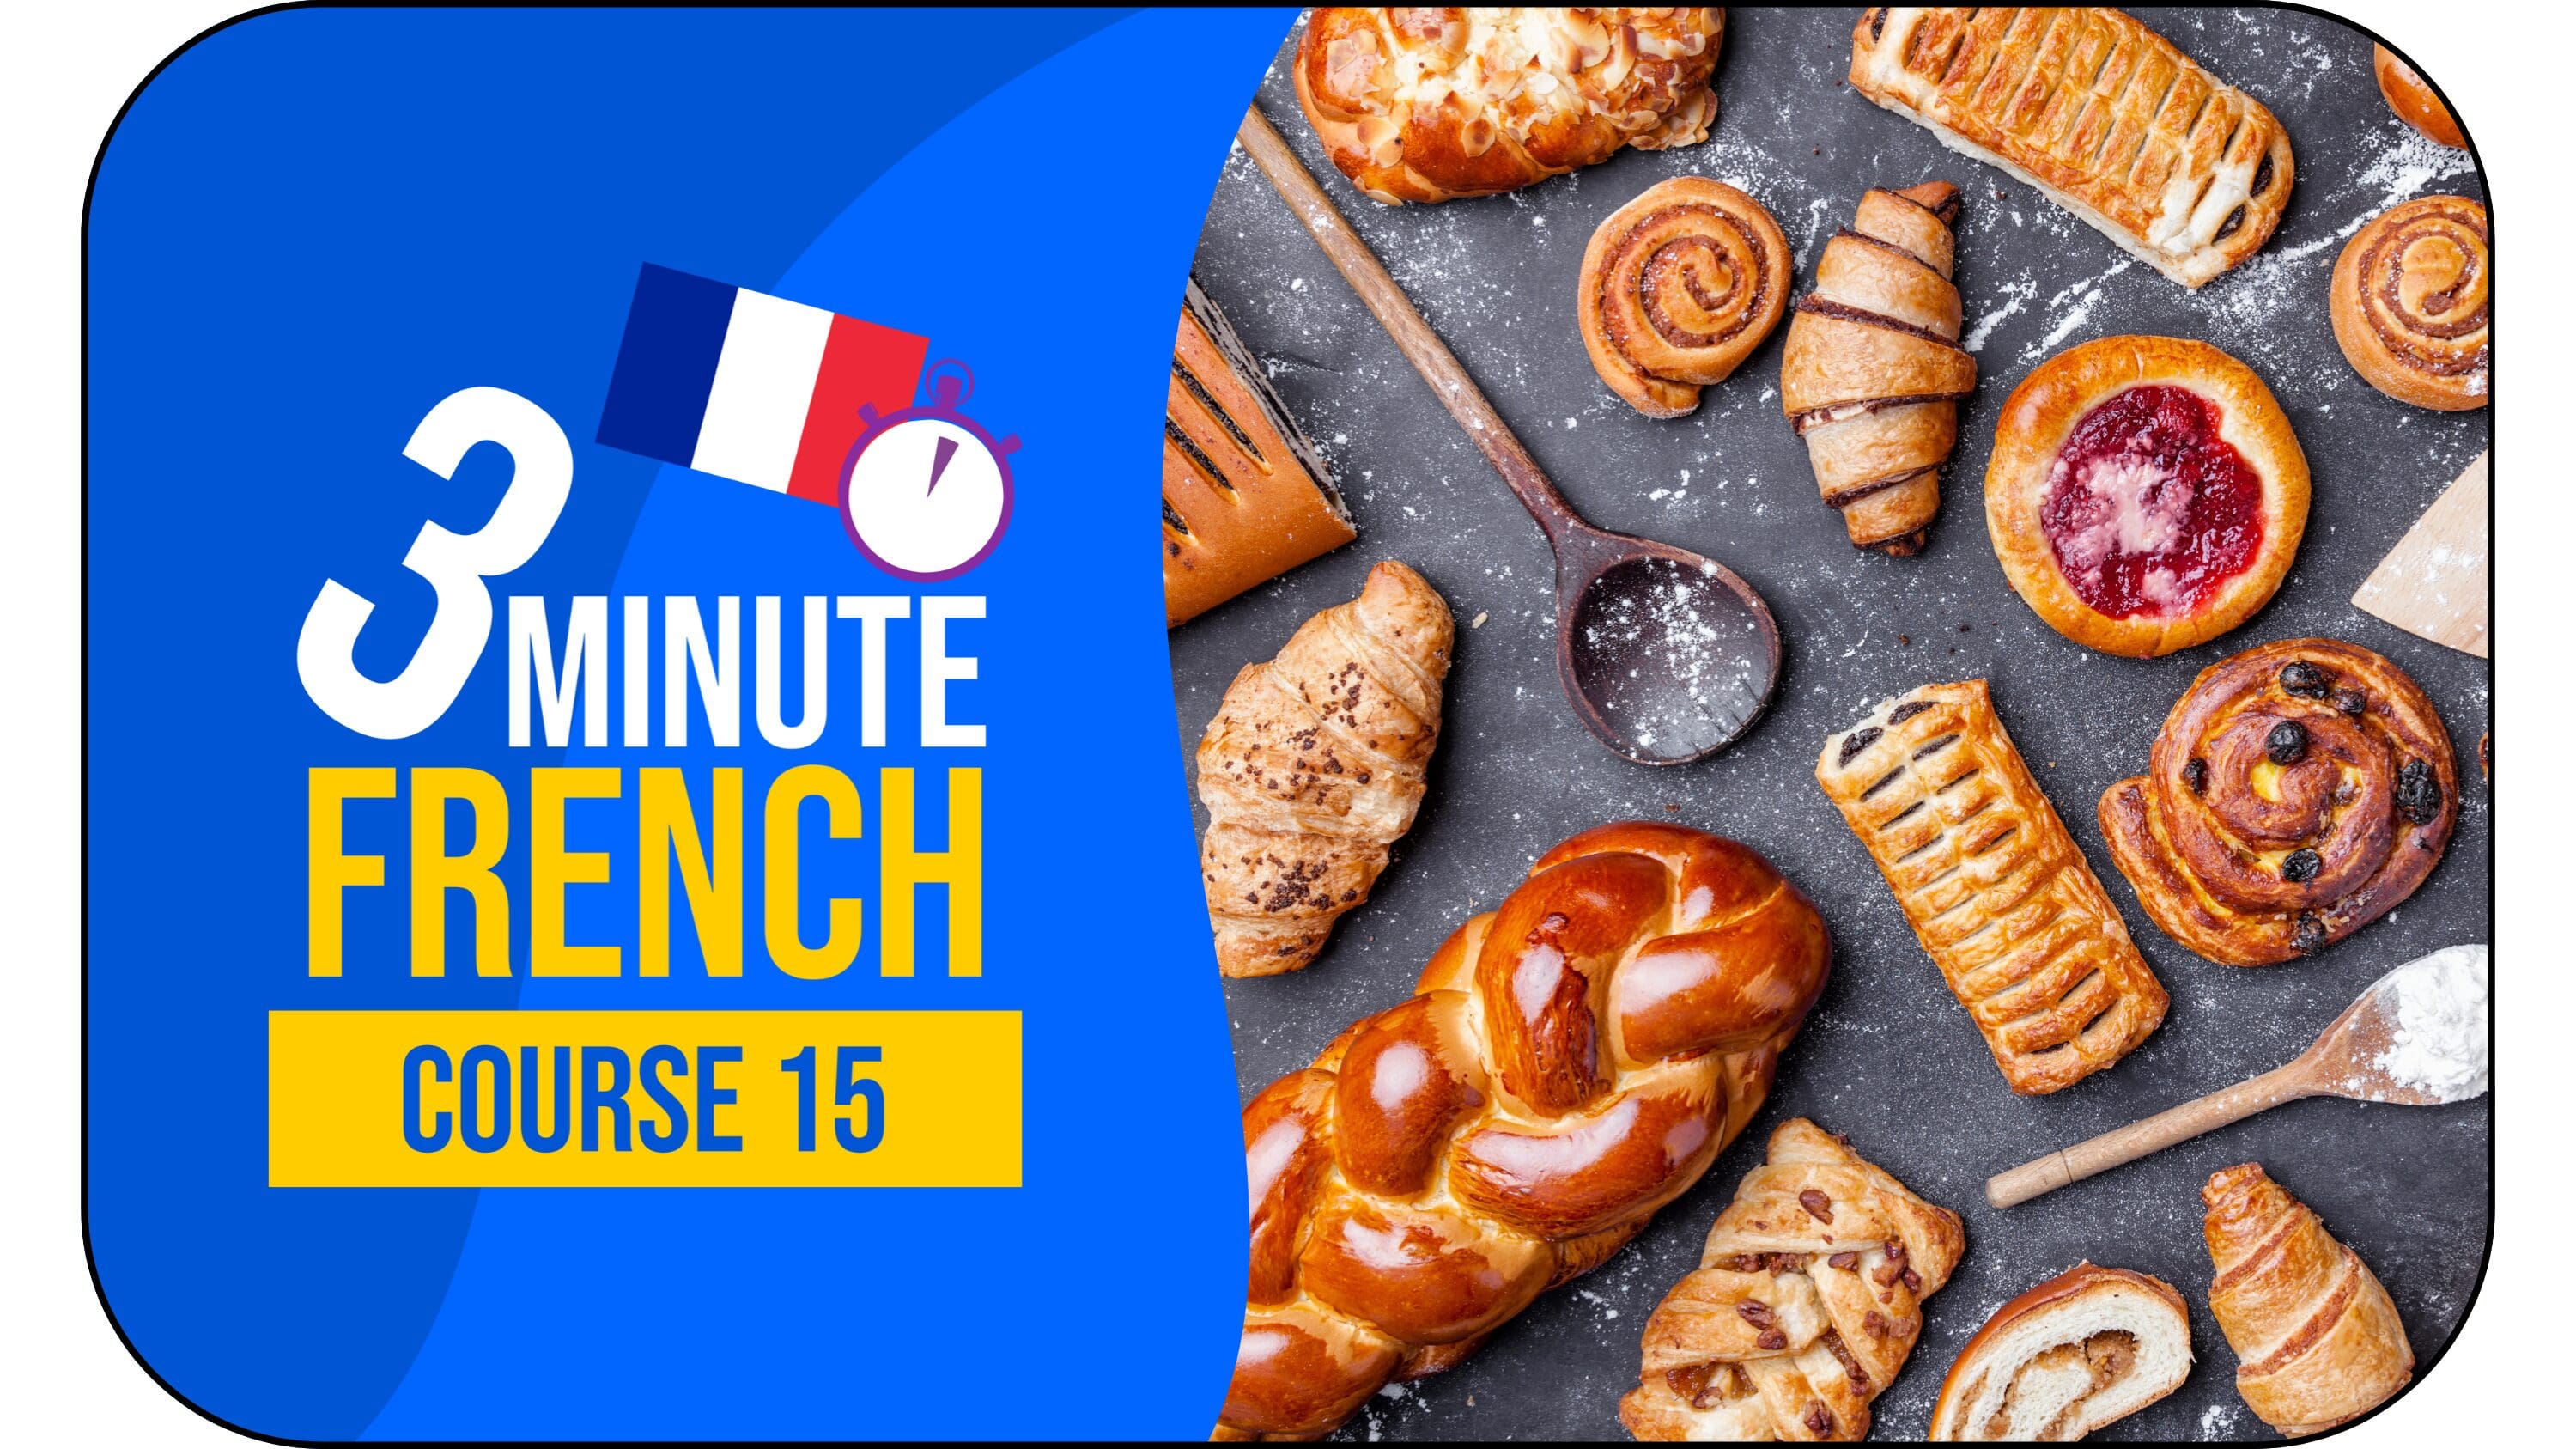 3 Minute French - Course 15